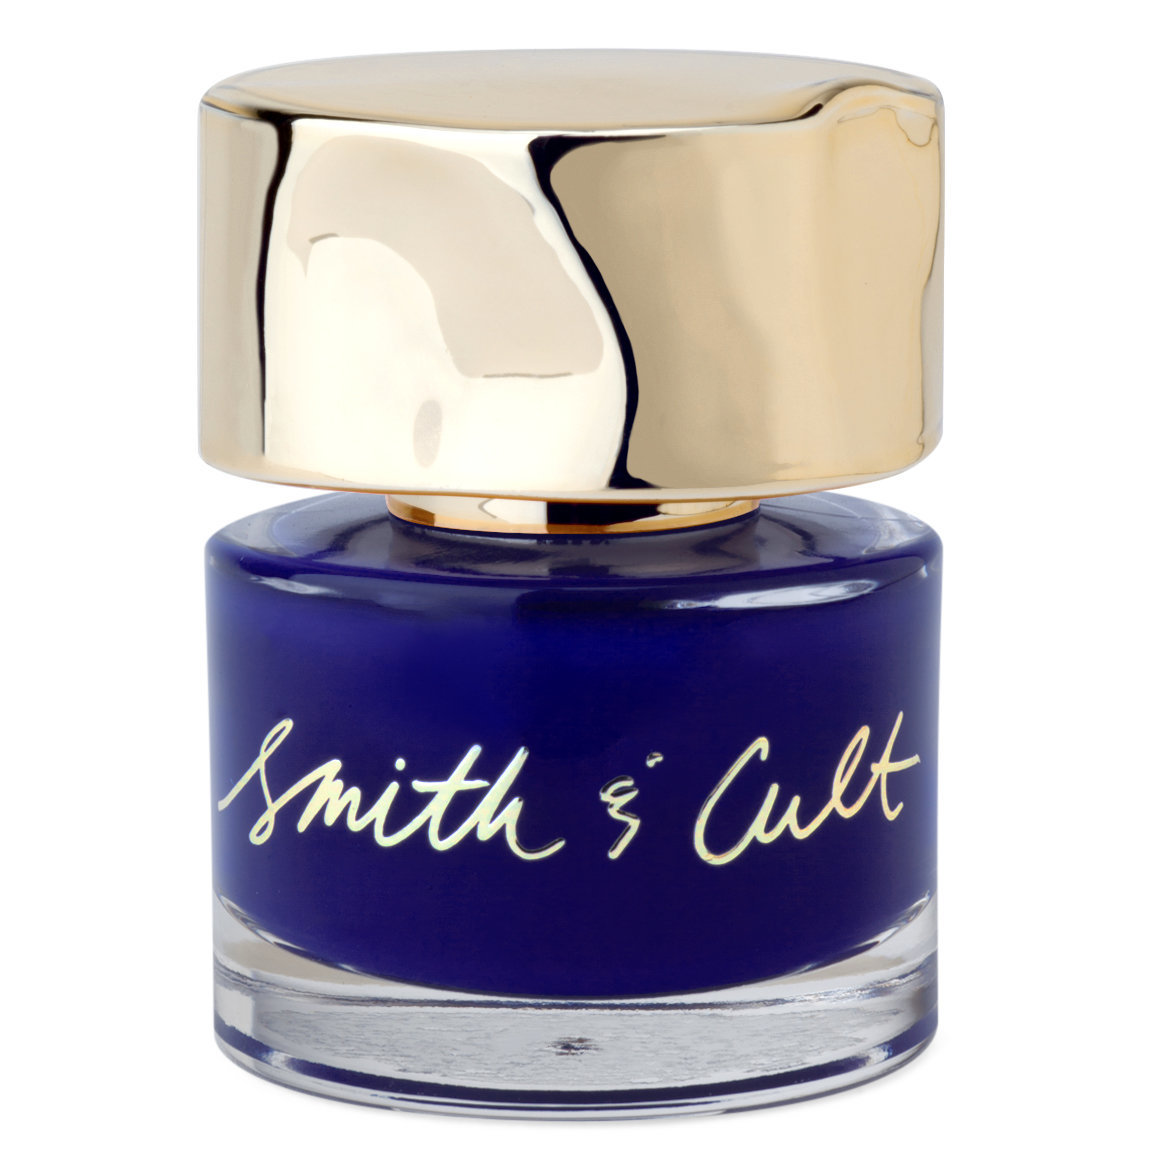 Smith & Cult Nailed Lacquer Kings & Thieves alternative view 1.